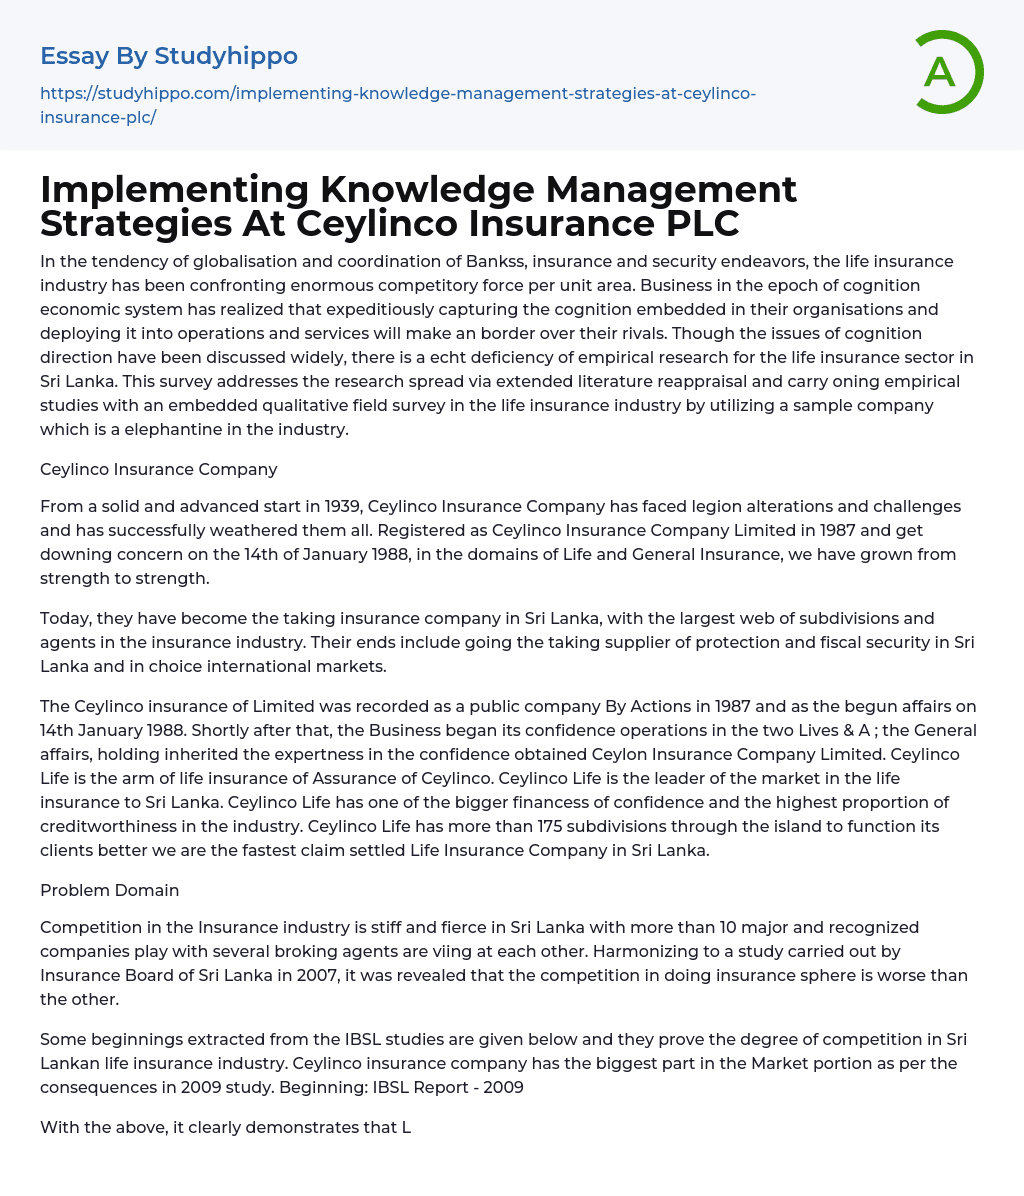 Implementing Knowledge Management Strategies At Ceylinco Insurance PLC Essay Example